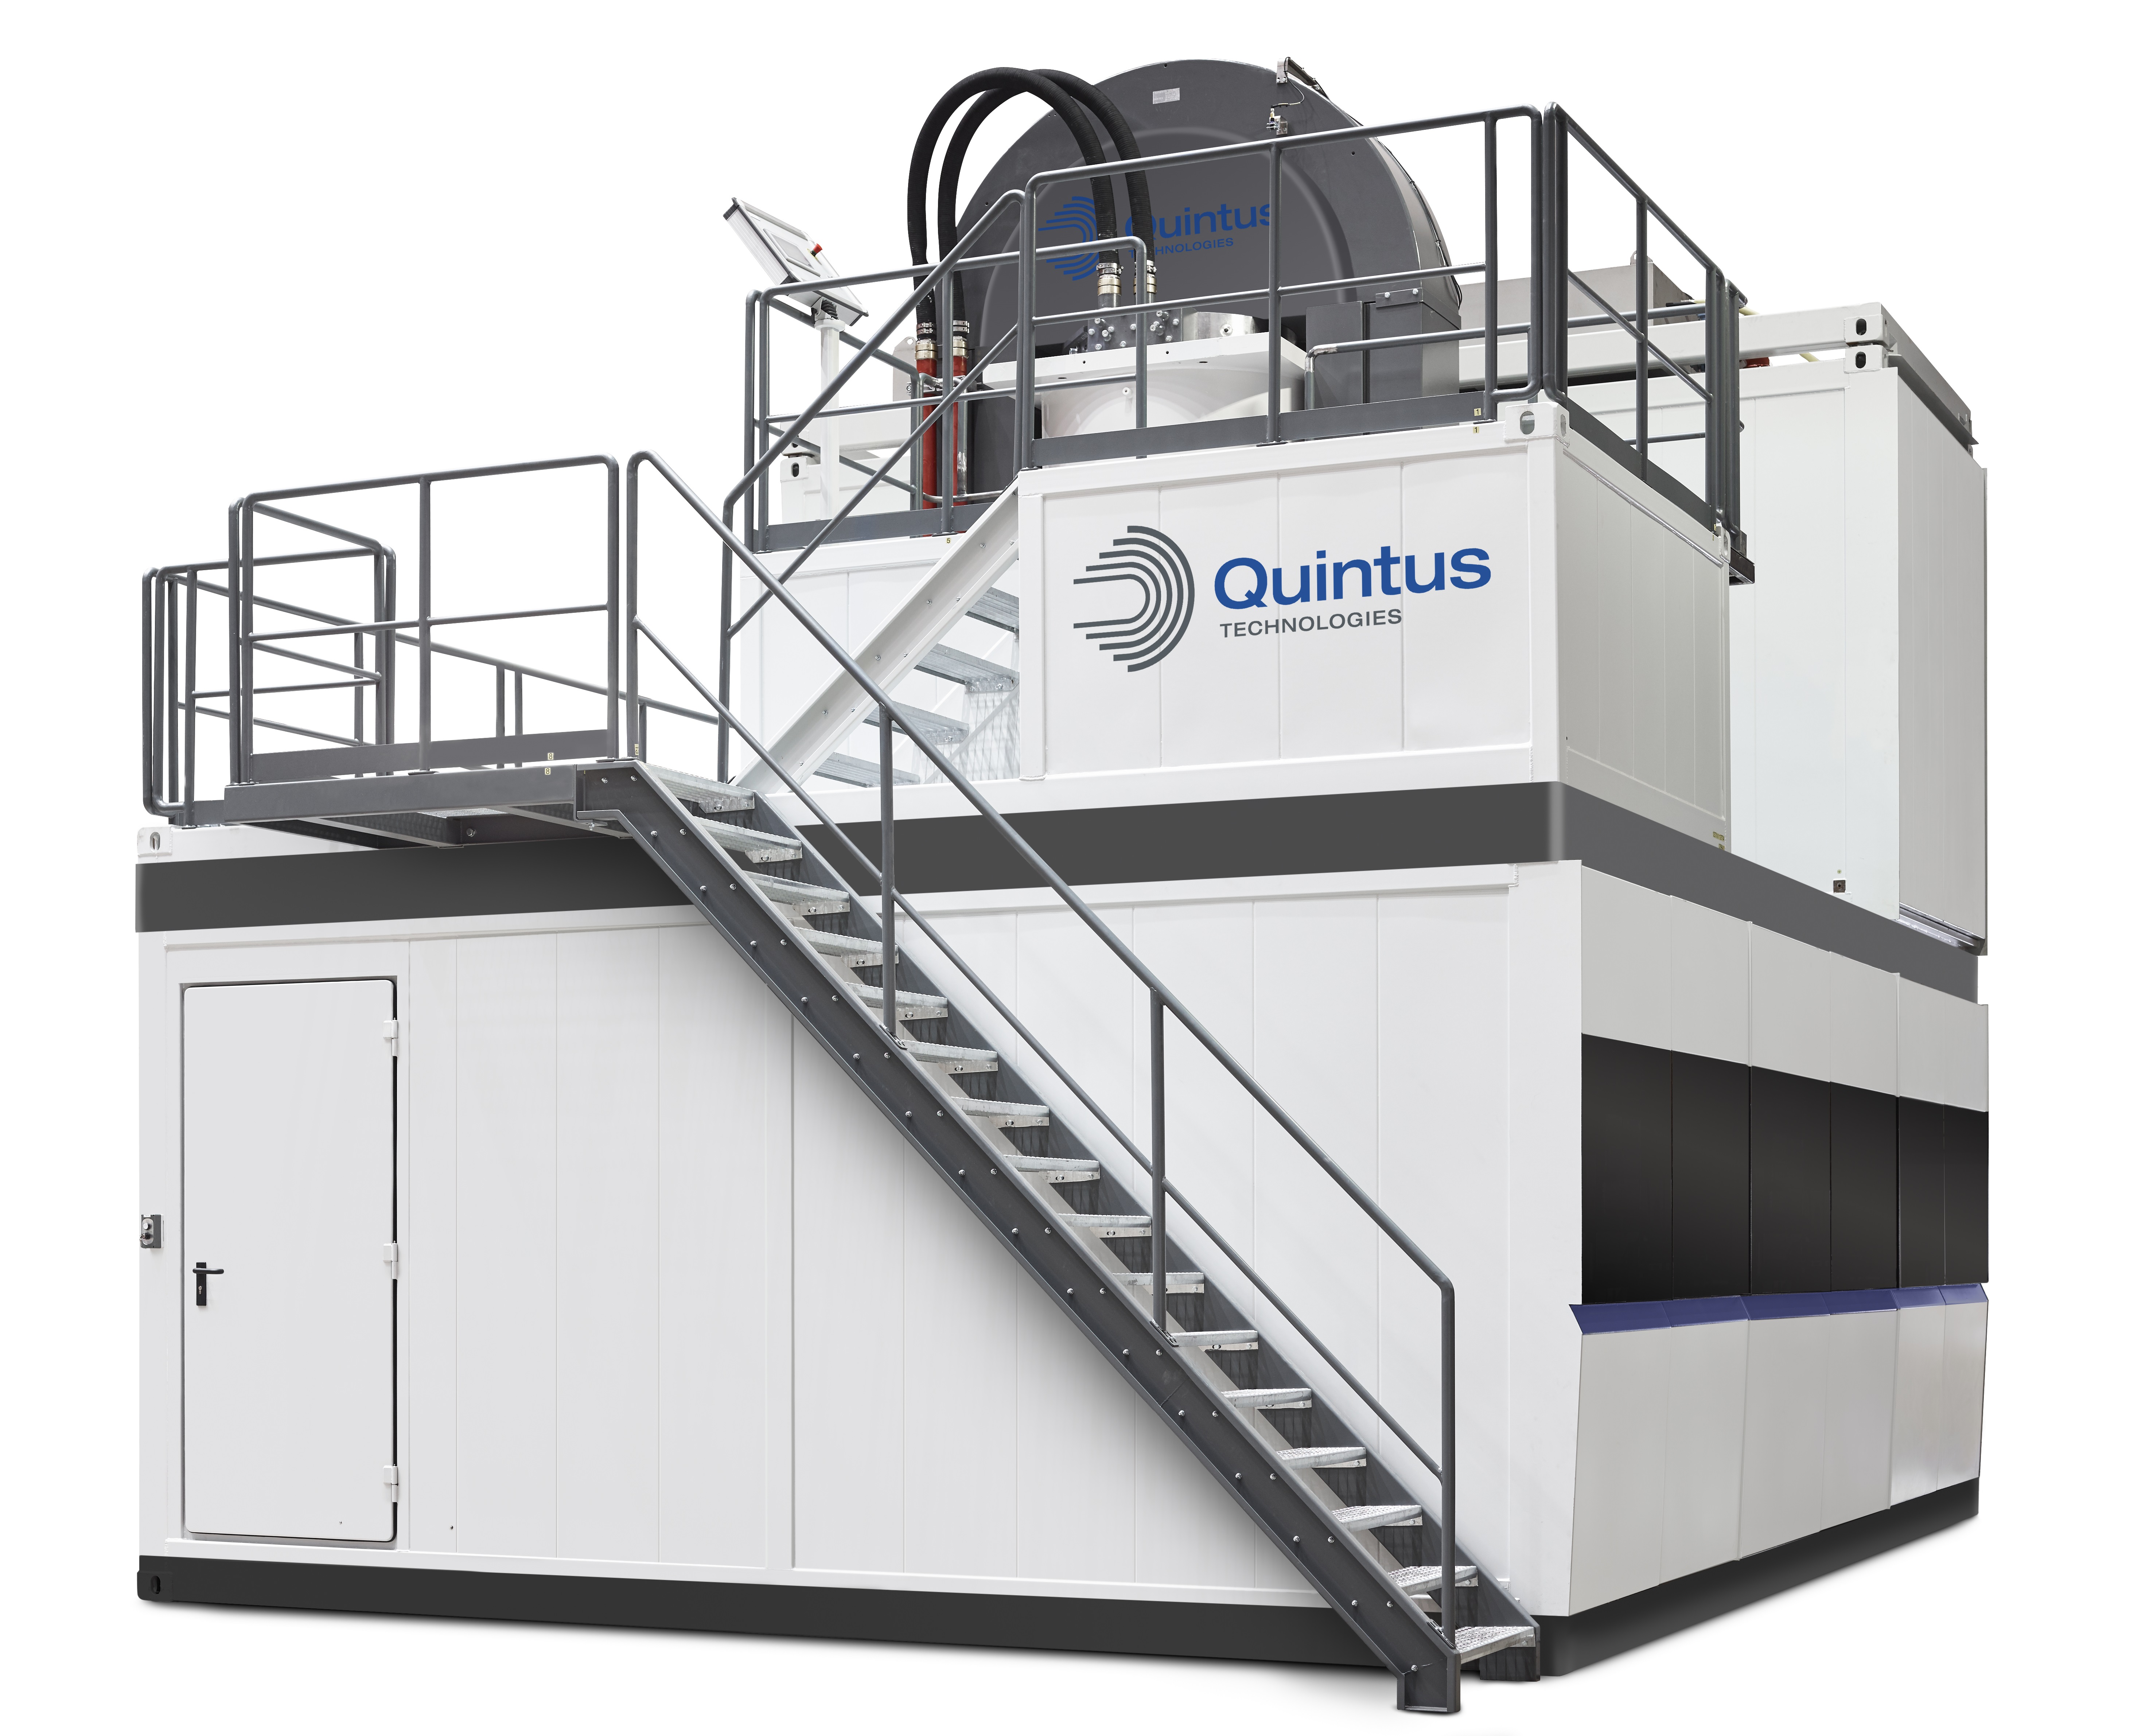 The QIH 122 M URC press with combined HIP and heat treatment. (Photo courtesy Quintus Technologies.)